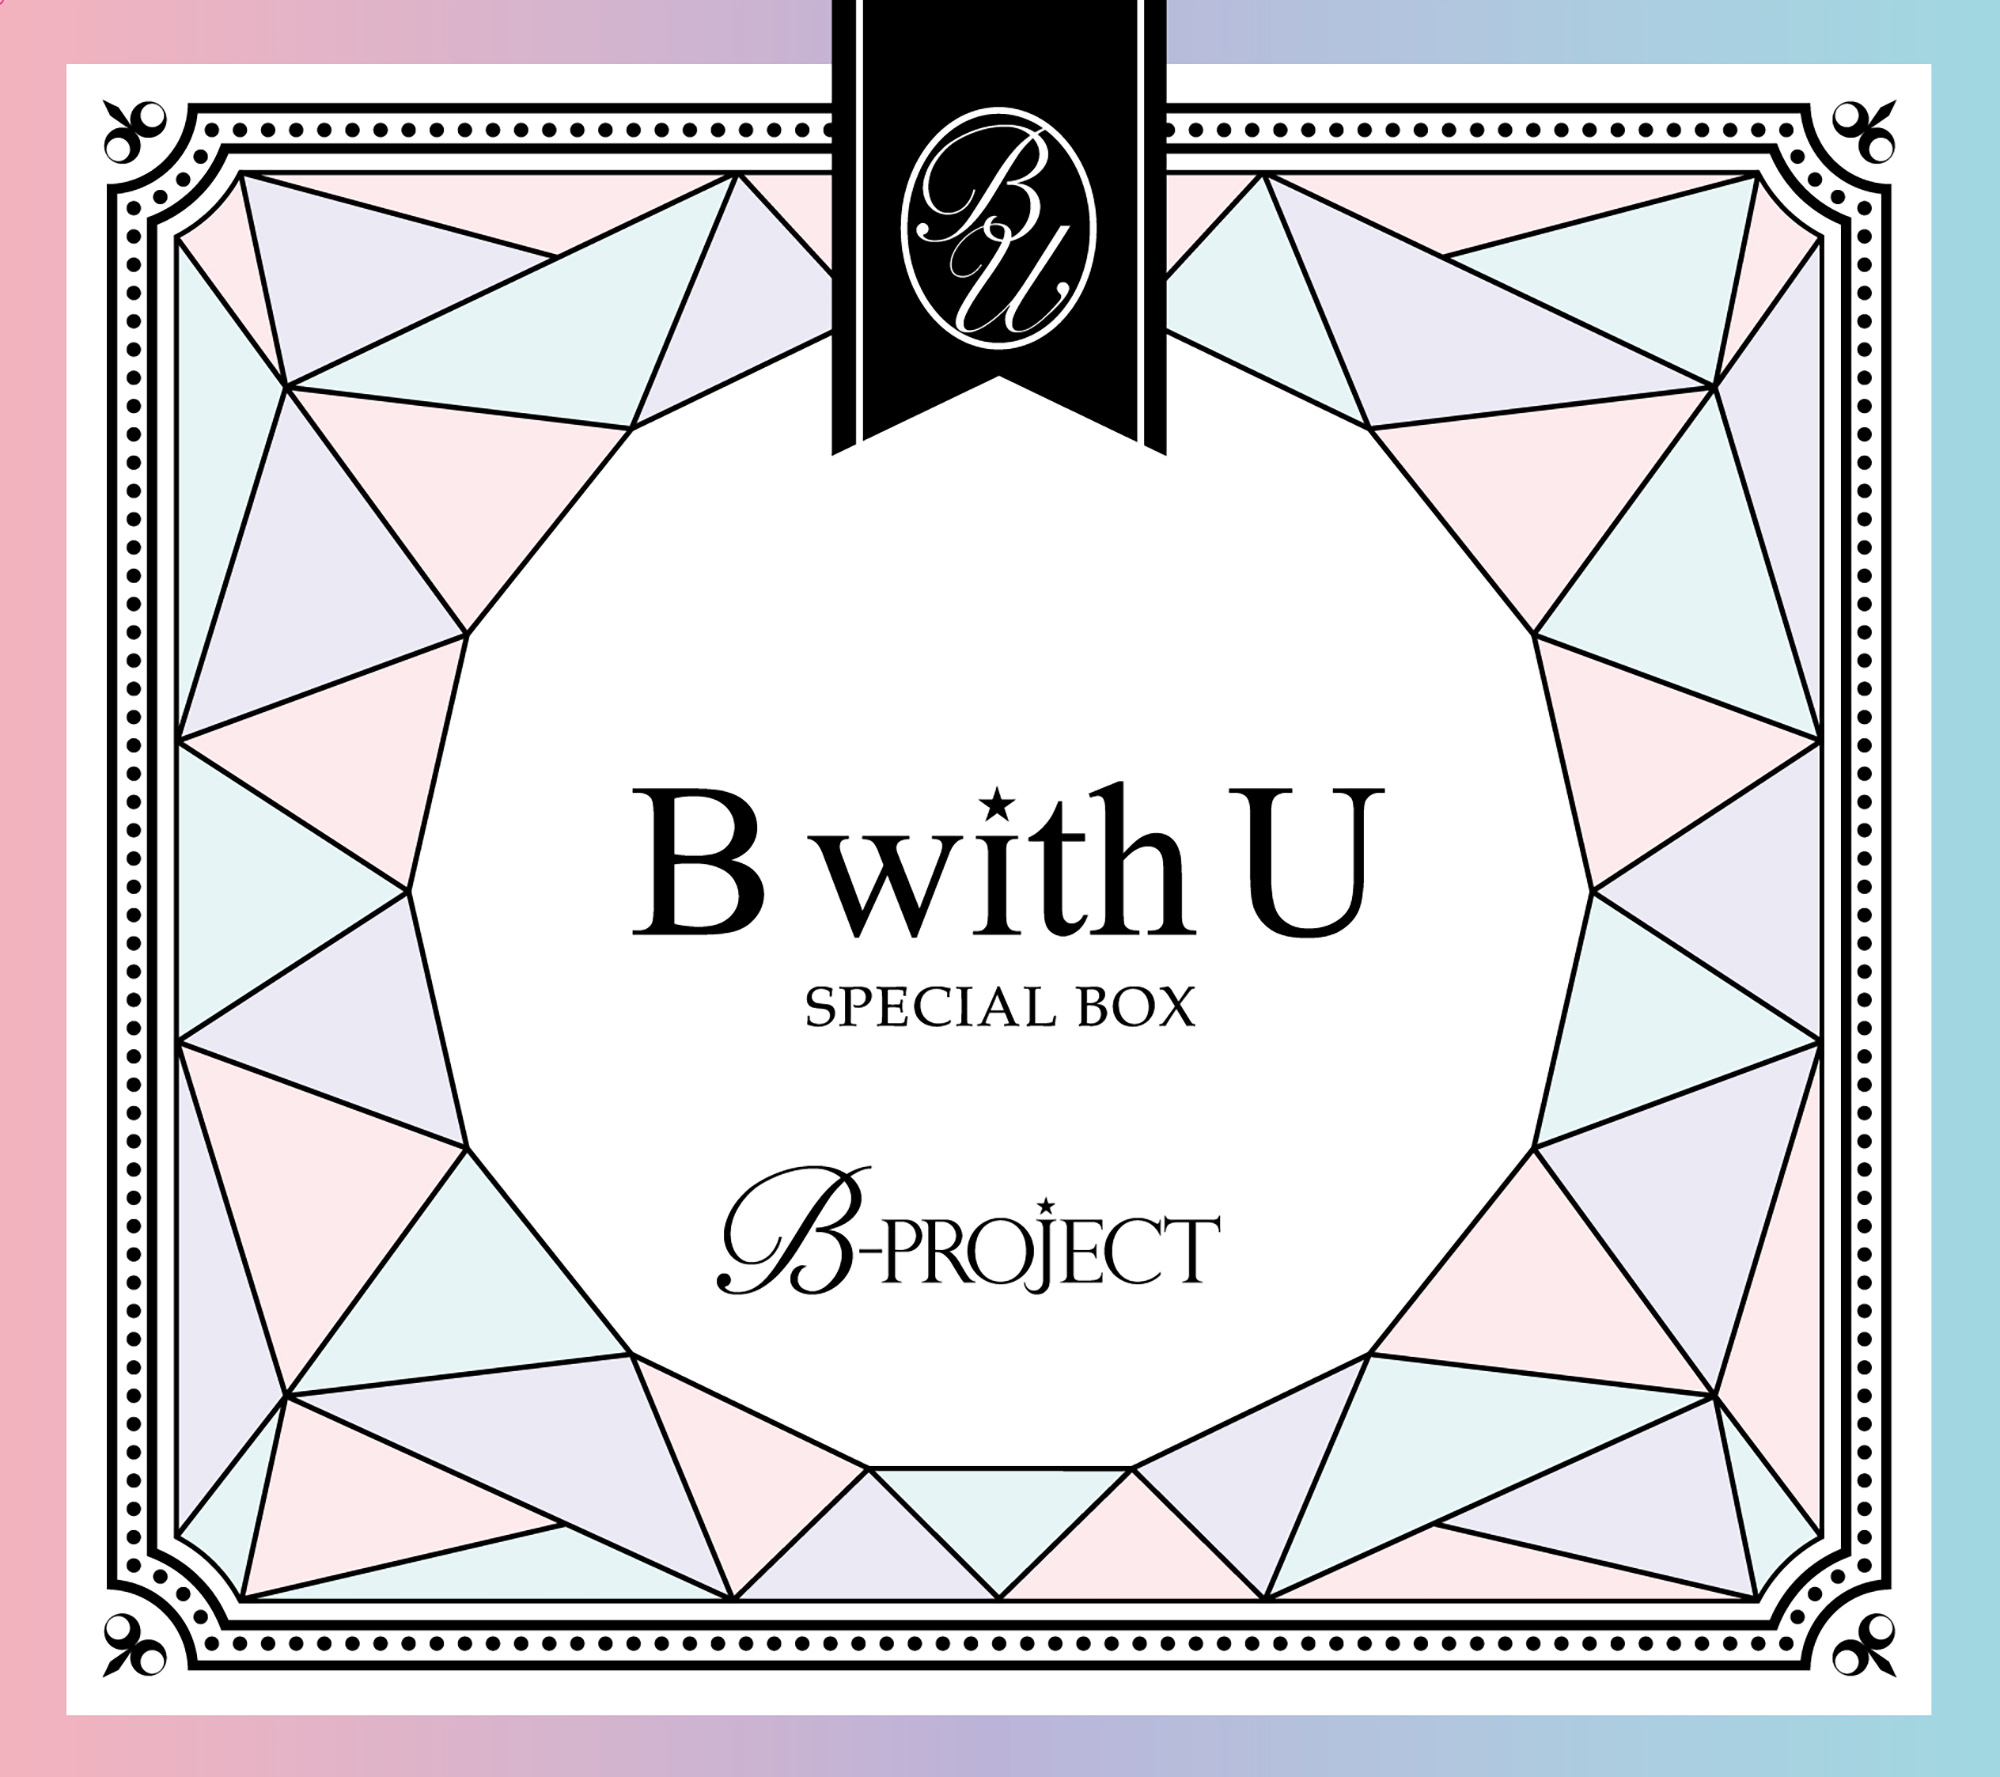 B with U SPECIAL BOX – MAGES. MUSIC